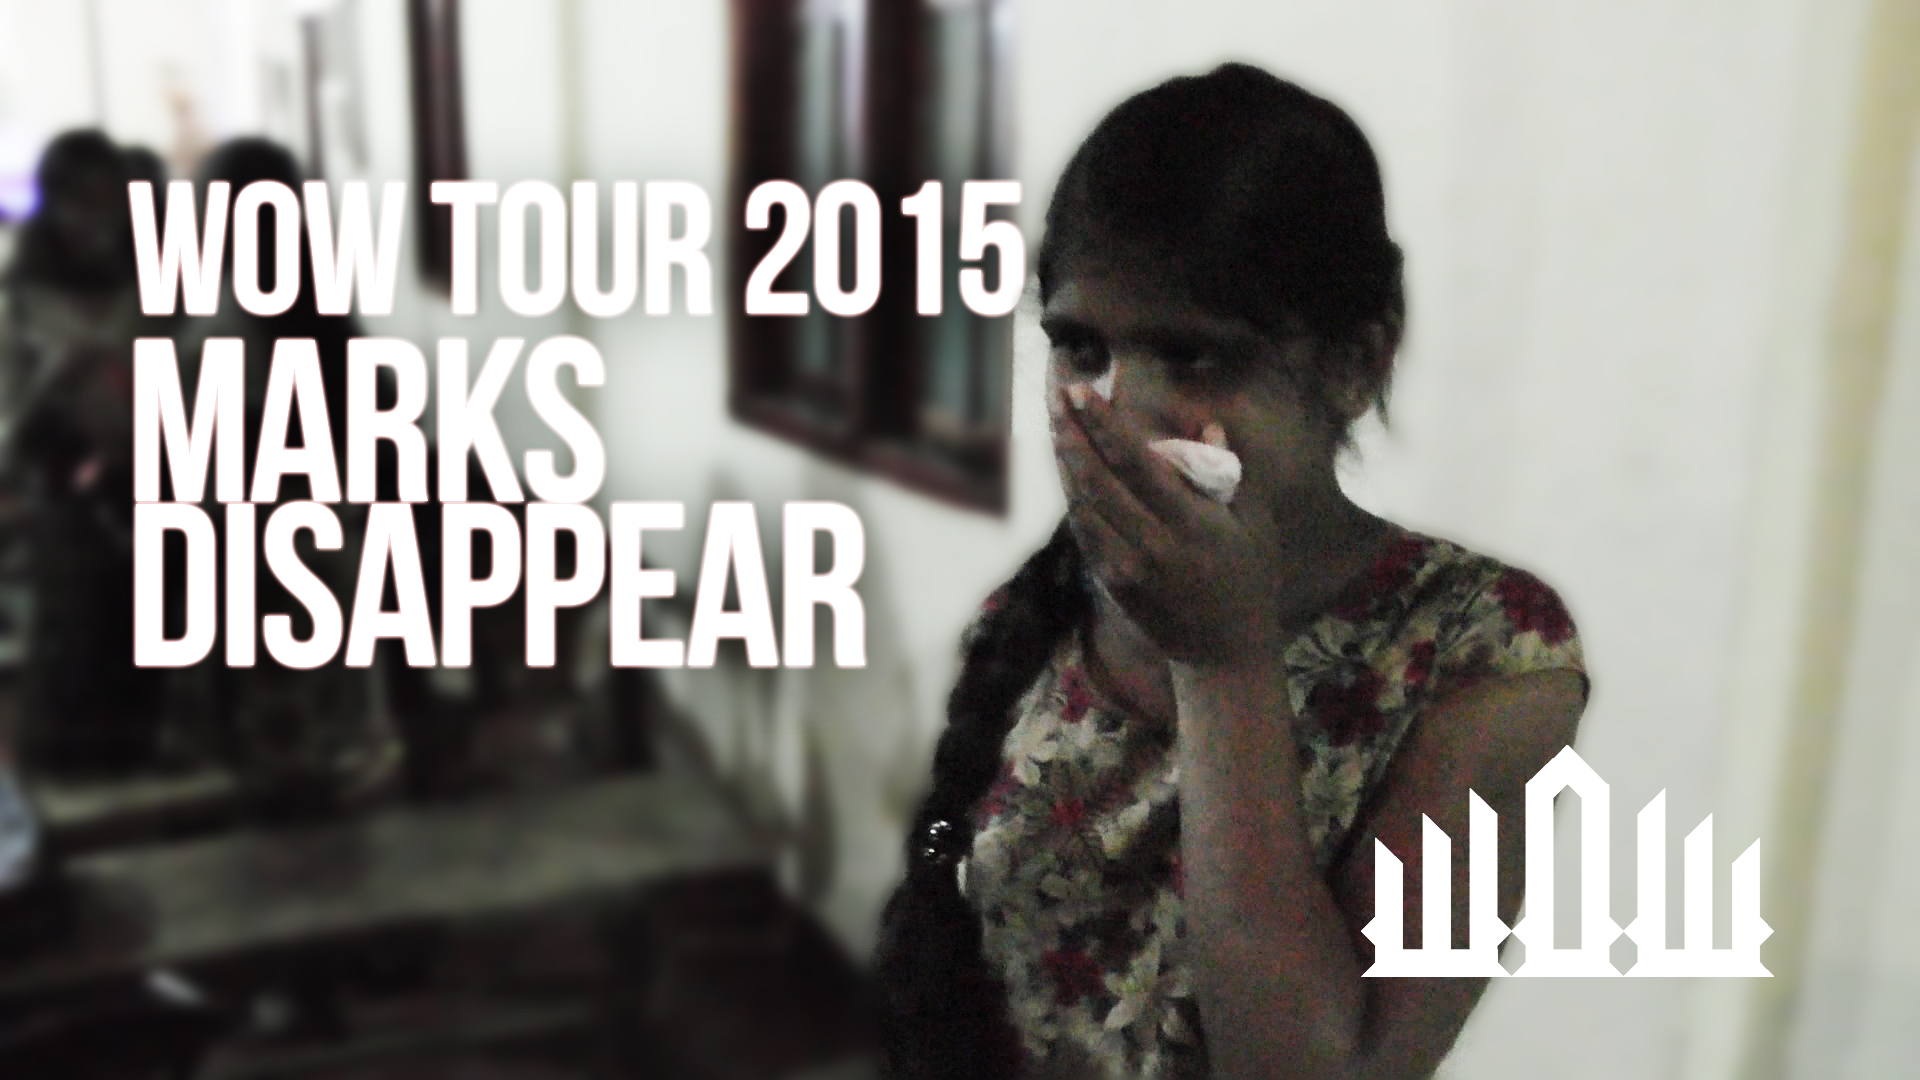 BIRTHMARKS DISAPPEAR – WOW TOUR 2015 – KIRBY DE LANEROLLE